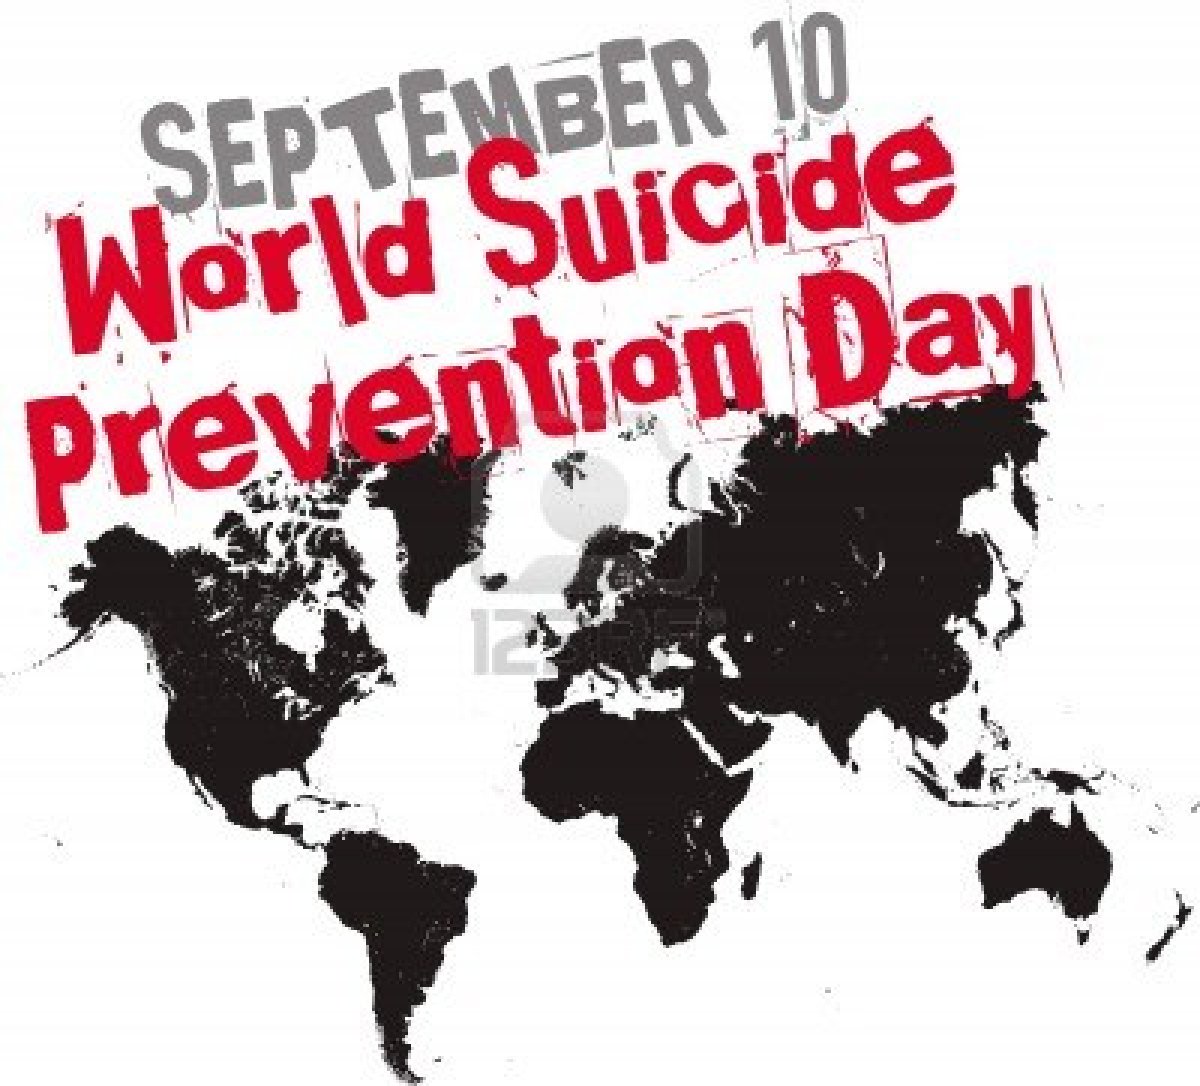 World Suicide Prevention Twitter Chat